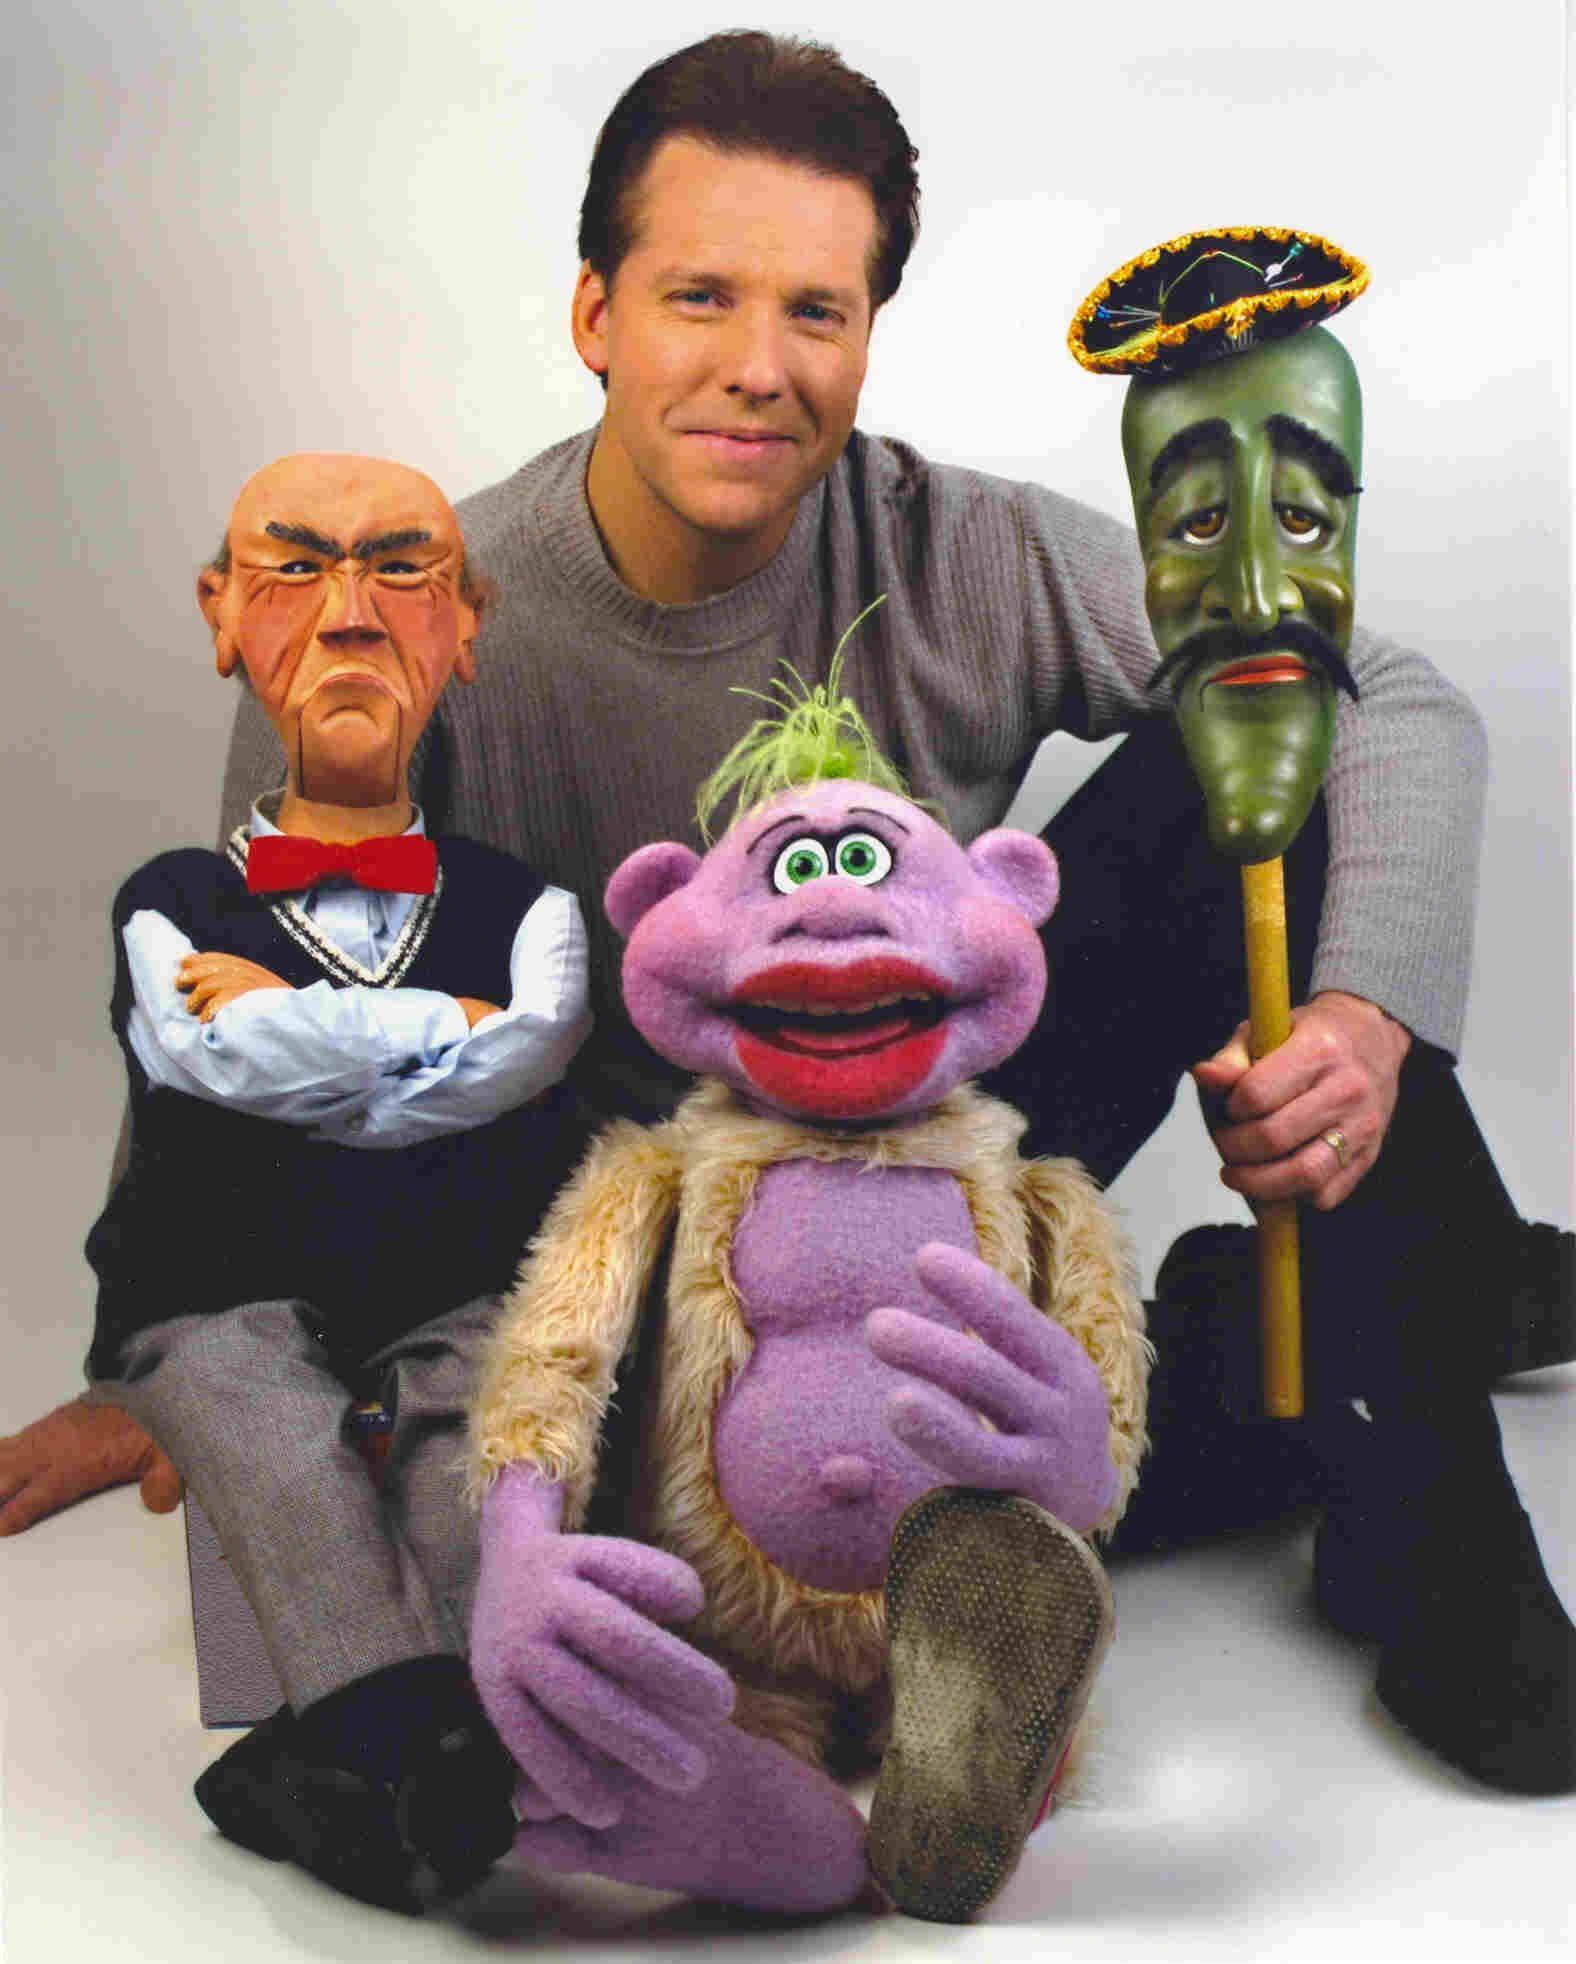 Jeff Dunham photos, pictures, stills, image, wallpapers, gallery.